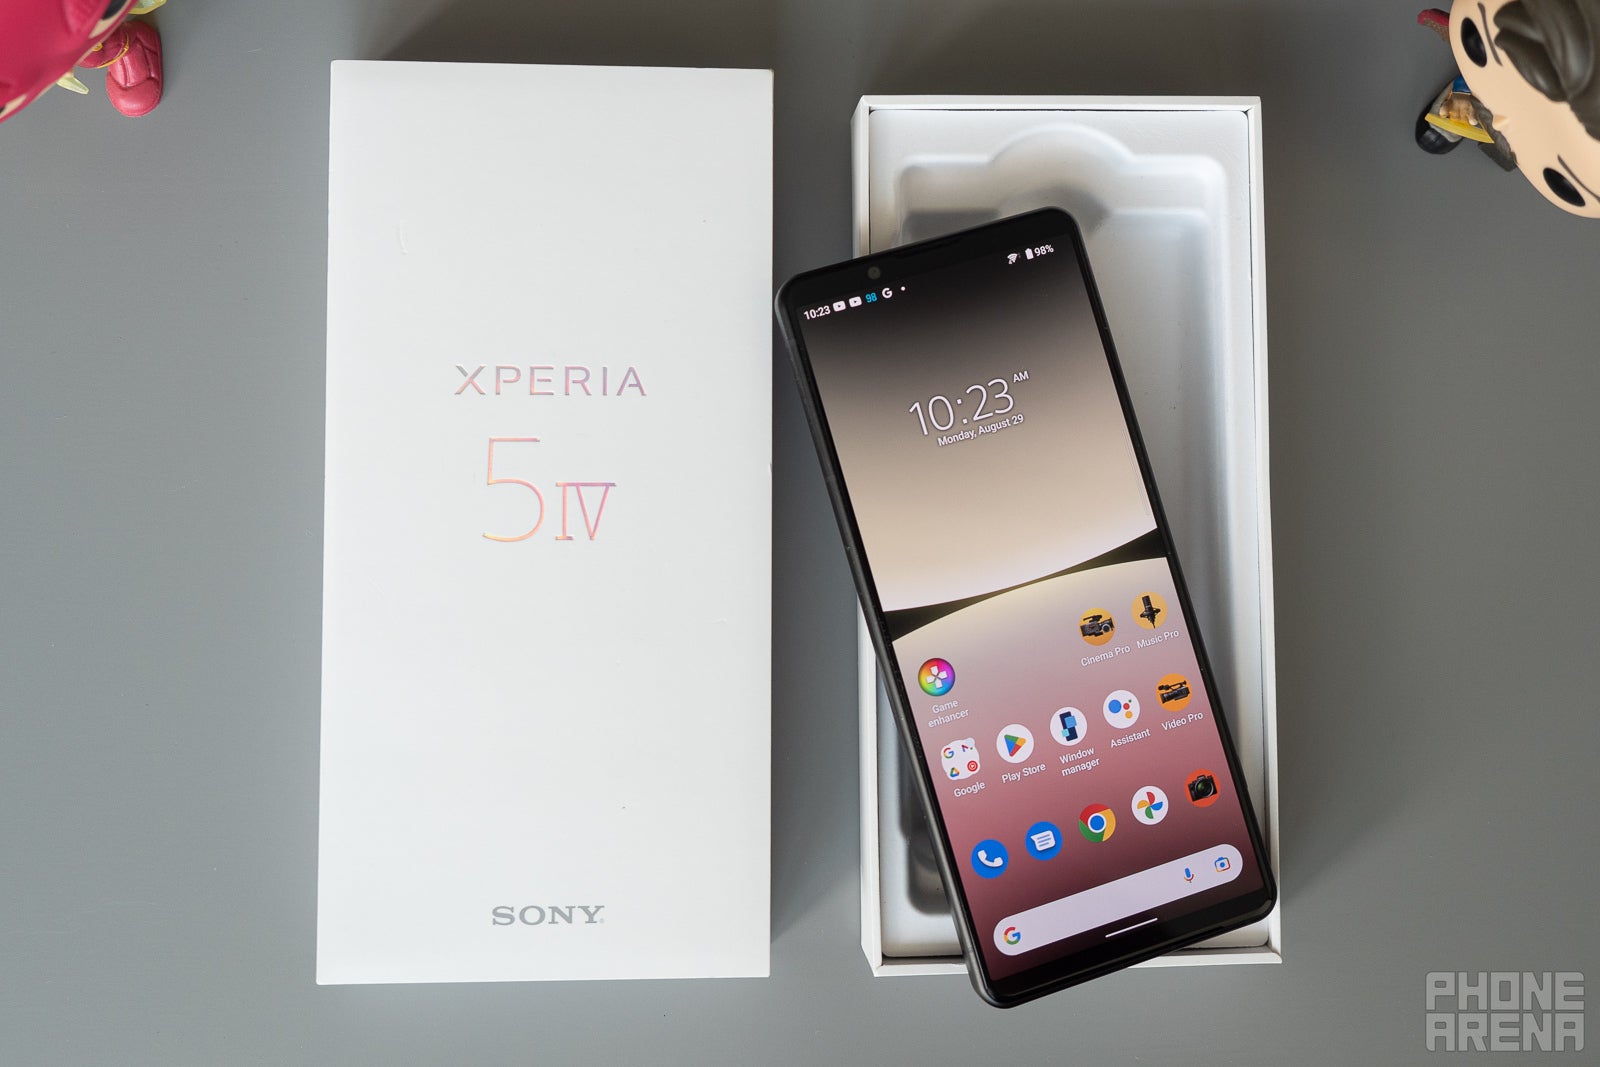 (Image credit - PhoneArena) You get a paper box and a phone inside - Sony Xperia 5 IV Review: The Undercover Superhero